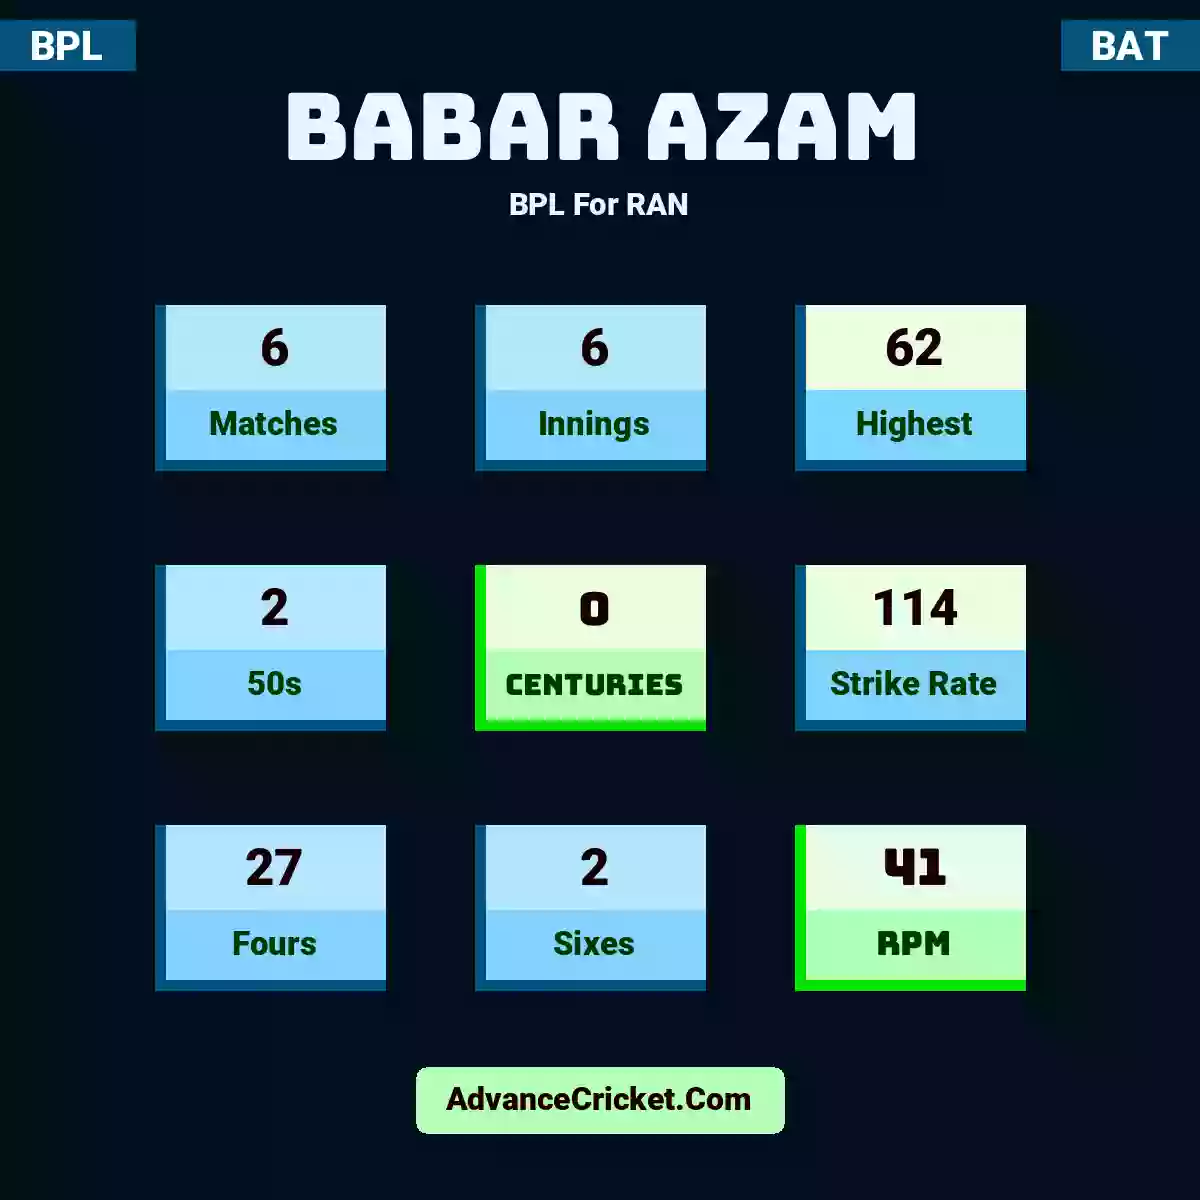 Babar Azam BPL  For RAN, Babar Azam played 6 matches, scored 62 runs as highest, 2 half-centuries, and 0 centuries, with a strike rate of 114. B.Azam hit 27 fours and 2 sixes, with an RPM of 41.